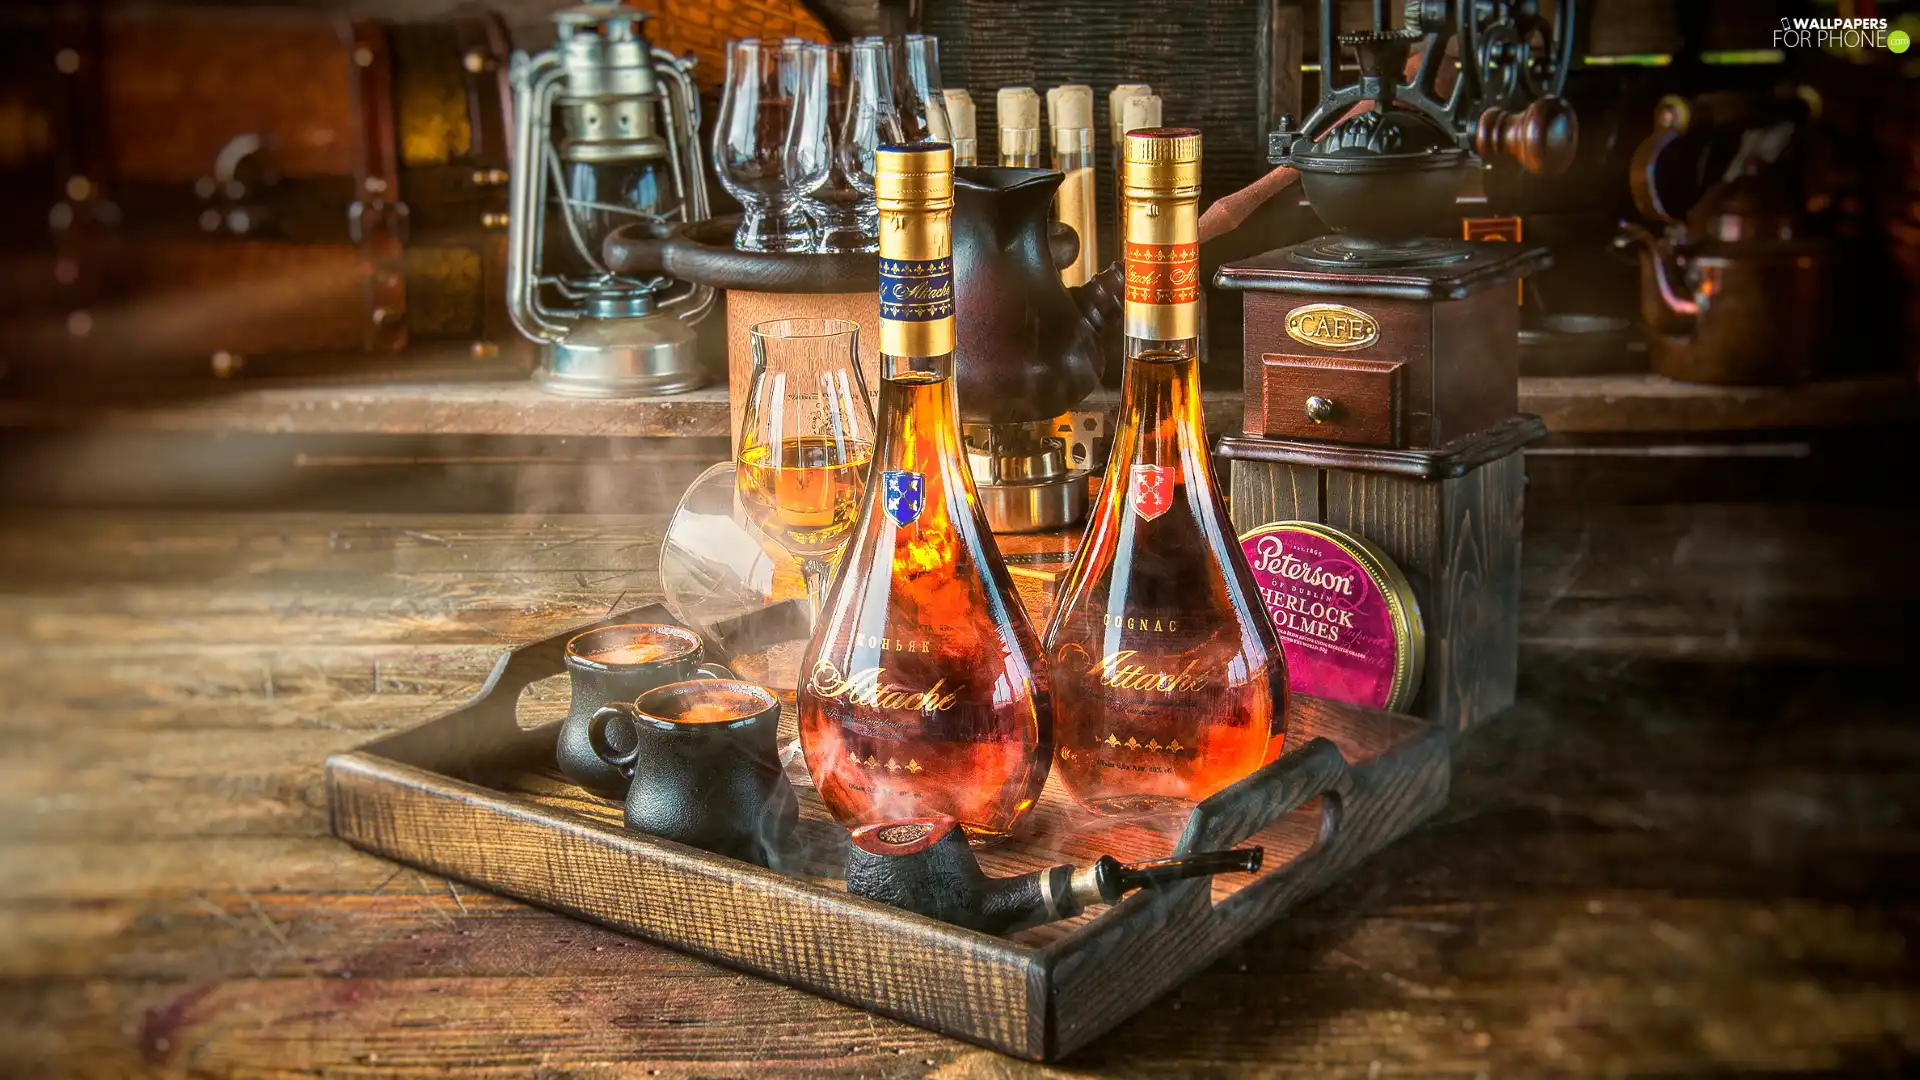 glasses, Bottles, coffee, cognac, composition, Tray, mill